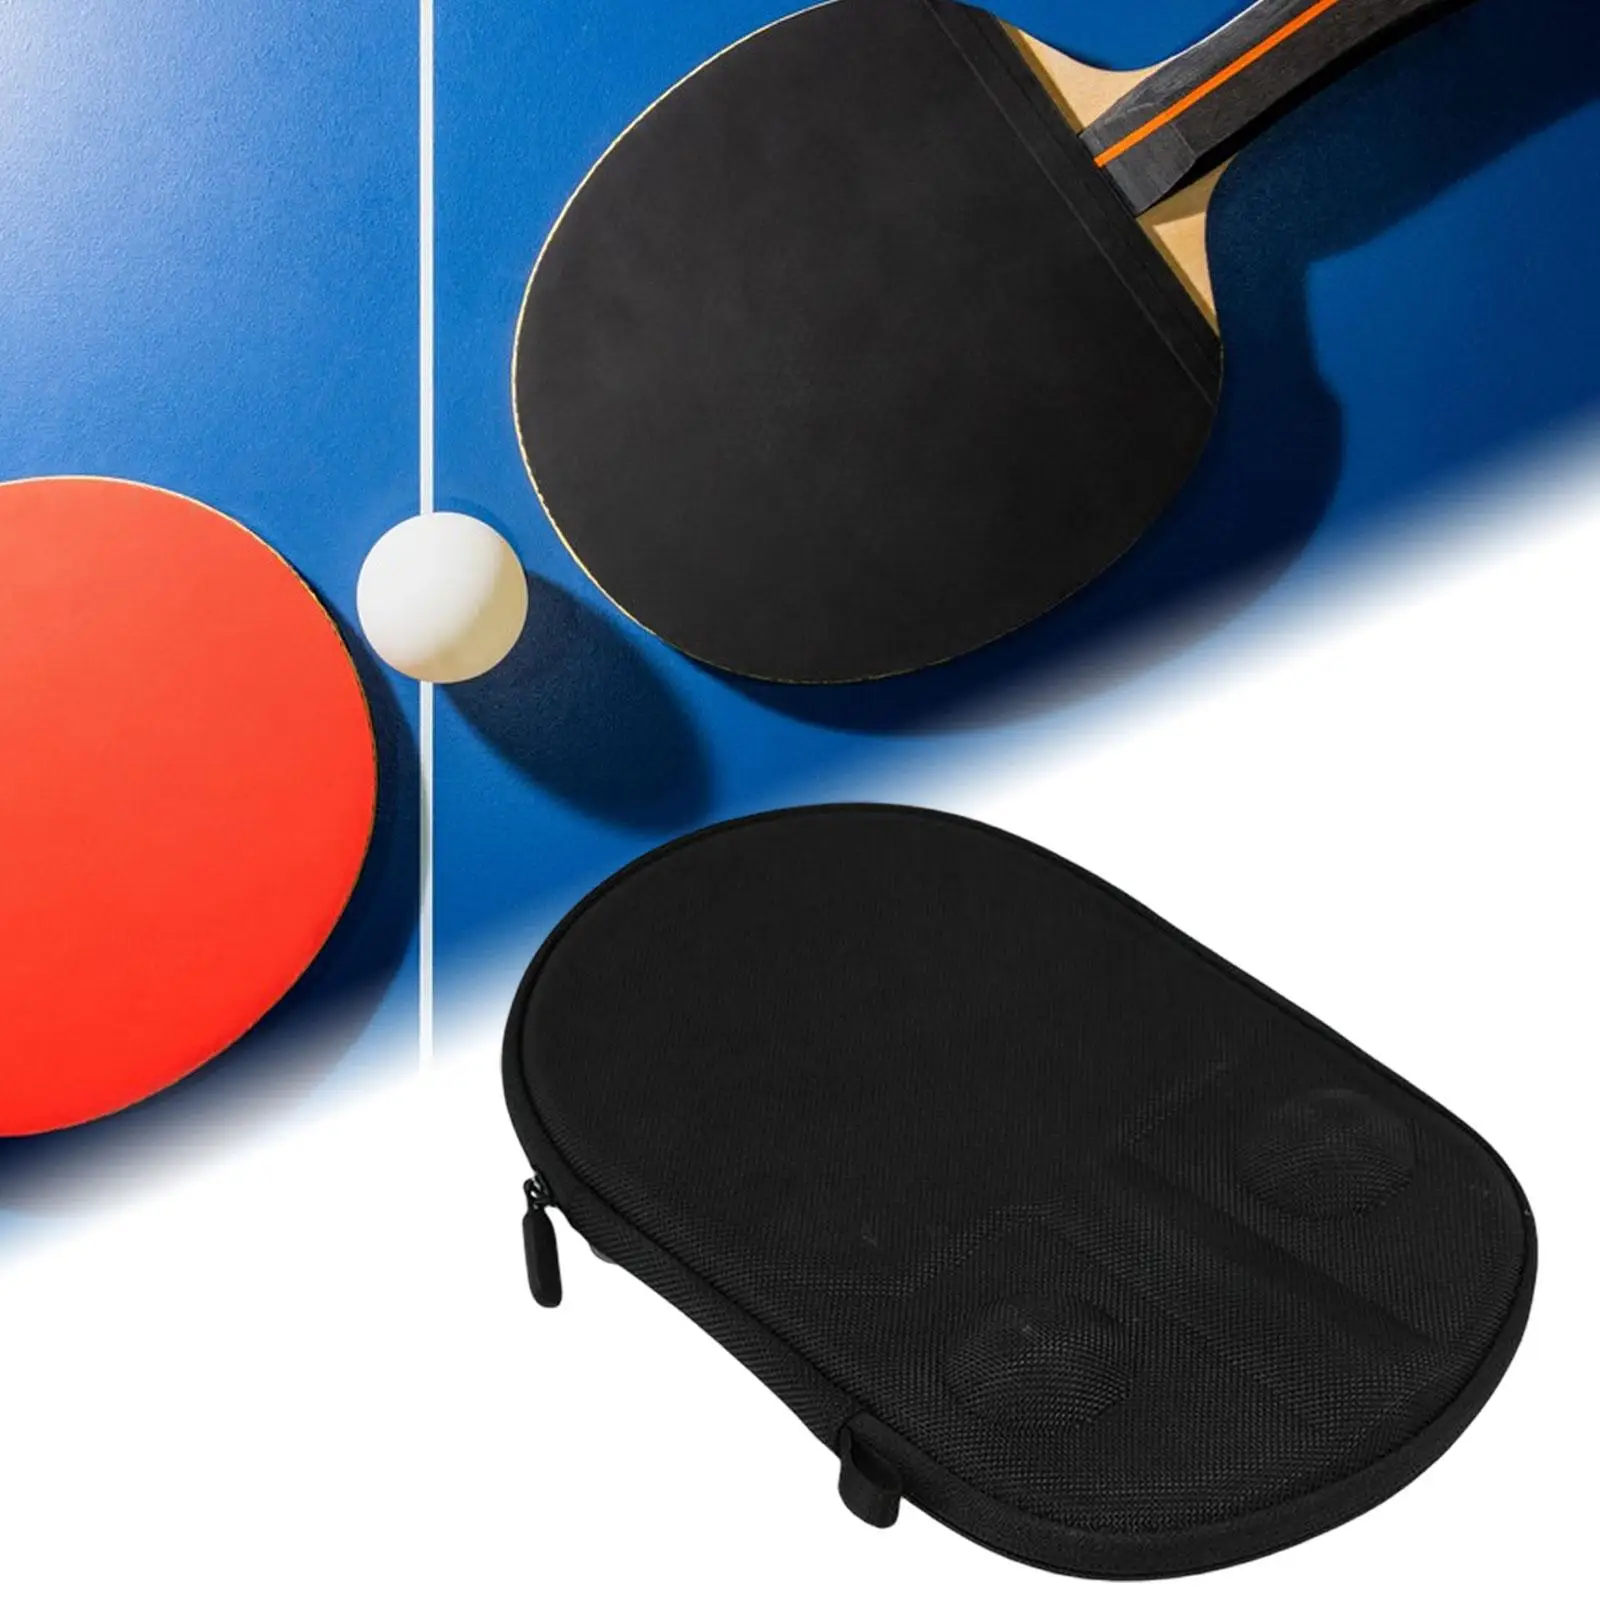 Portable Table Tennis Racket Case Storage Case with Zipper Hold 1 Racket and 2